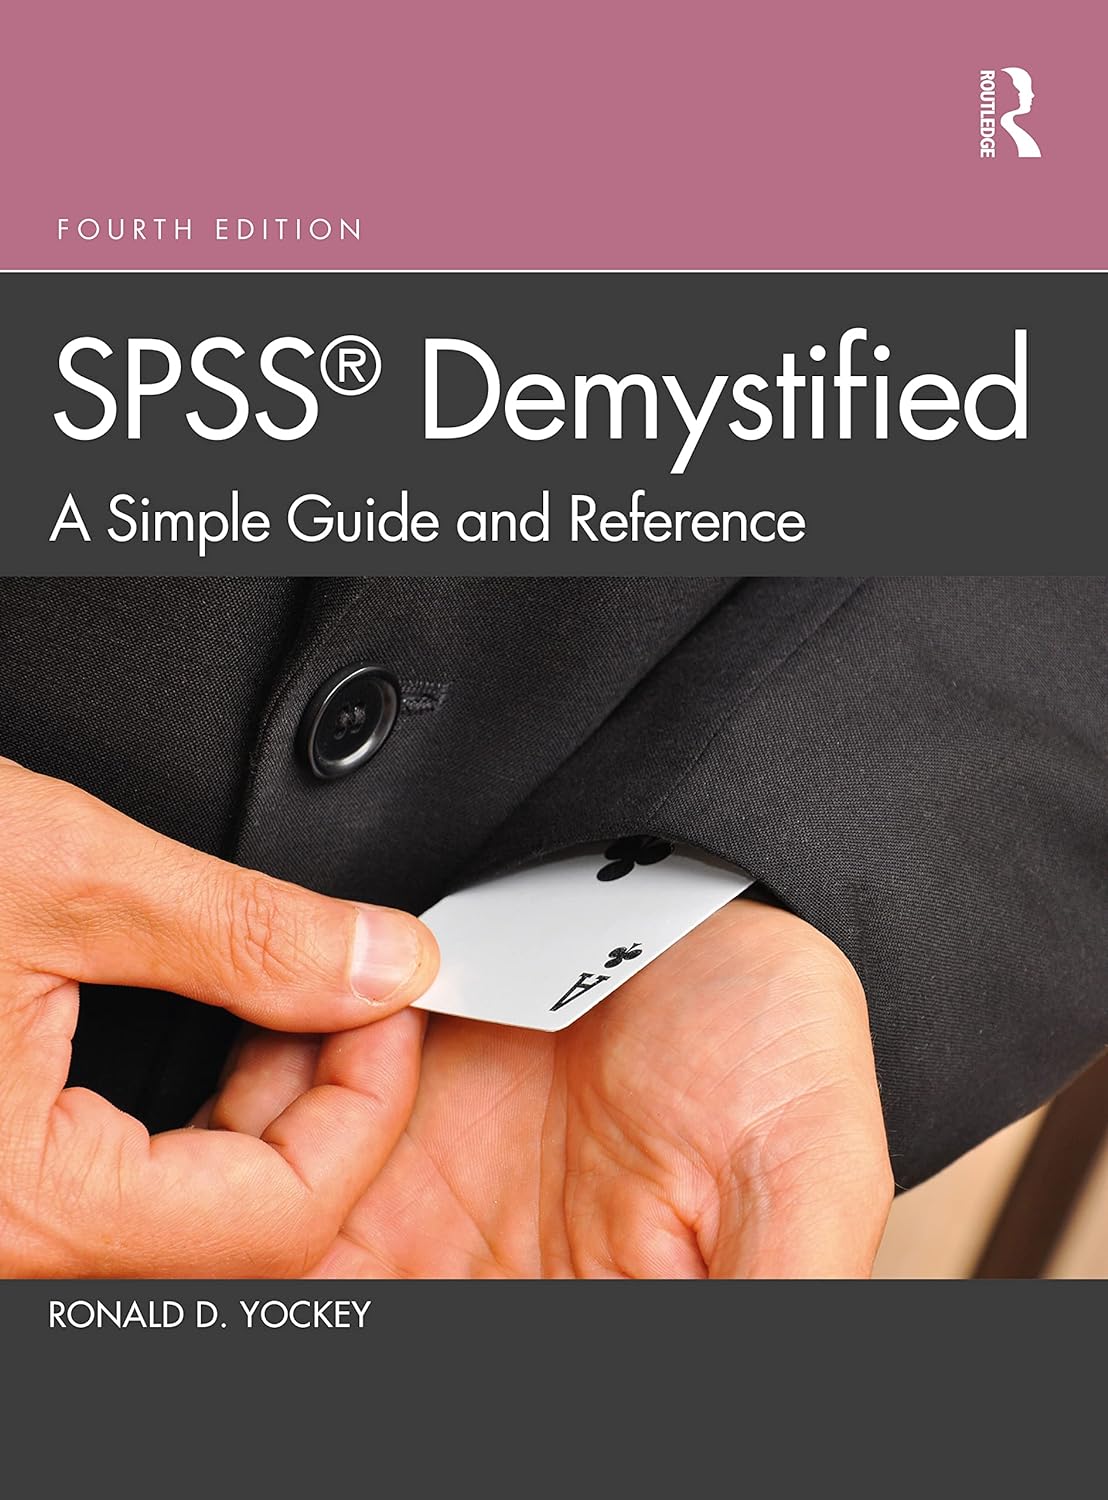 (EBook PDF)SPSS Demystified: A Simple Guide and Reference, 4th Edition by Ronald D. Yockey